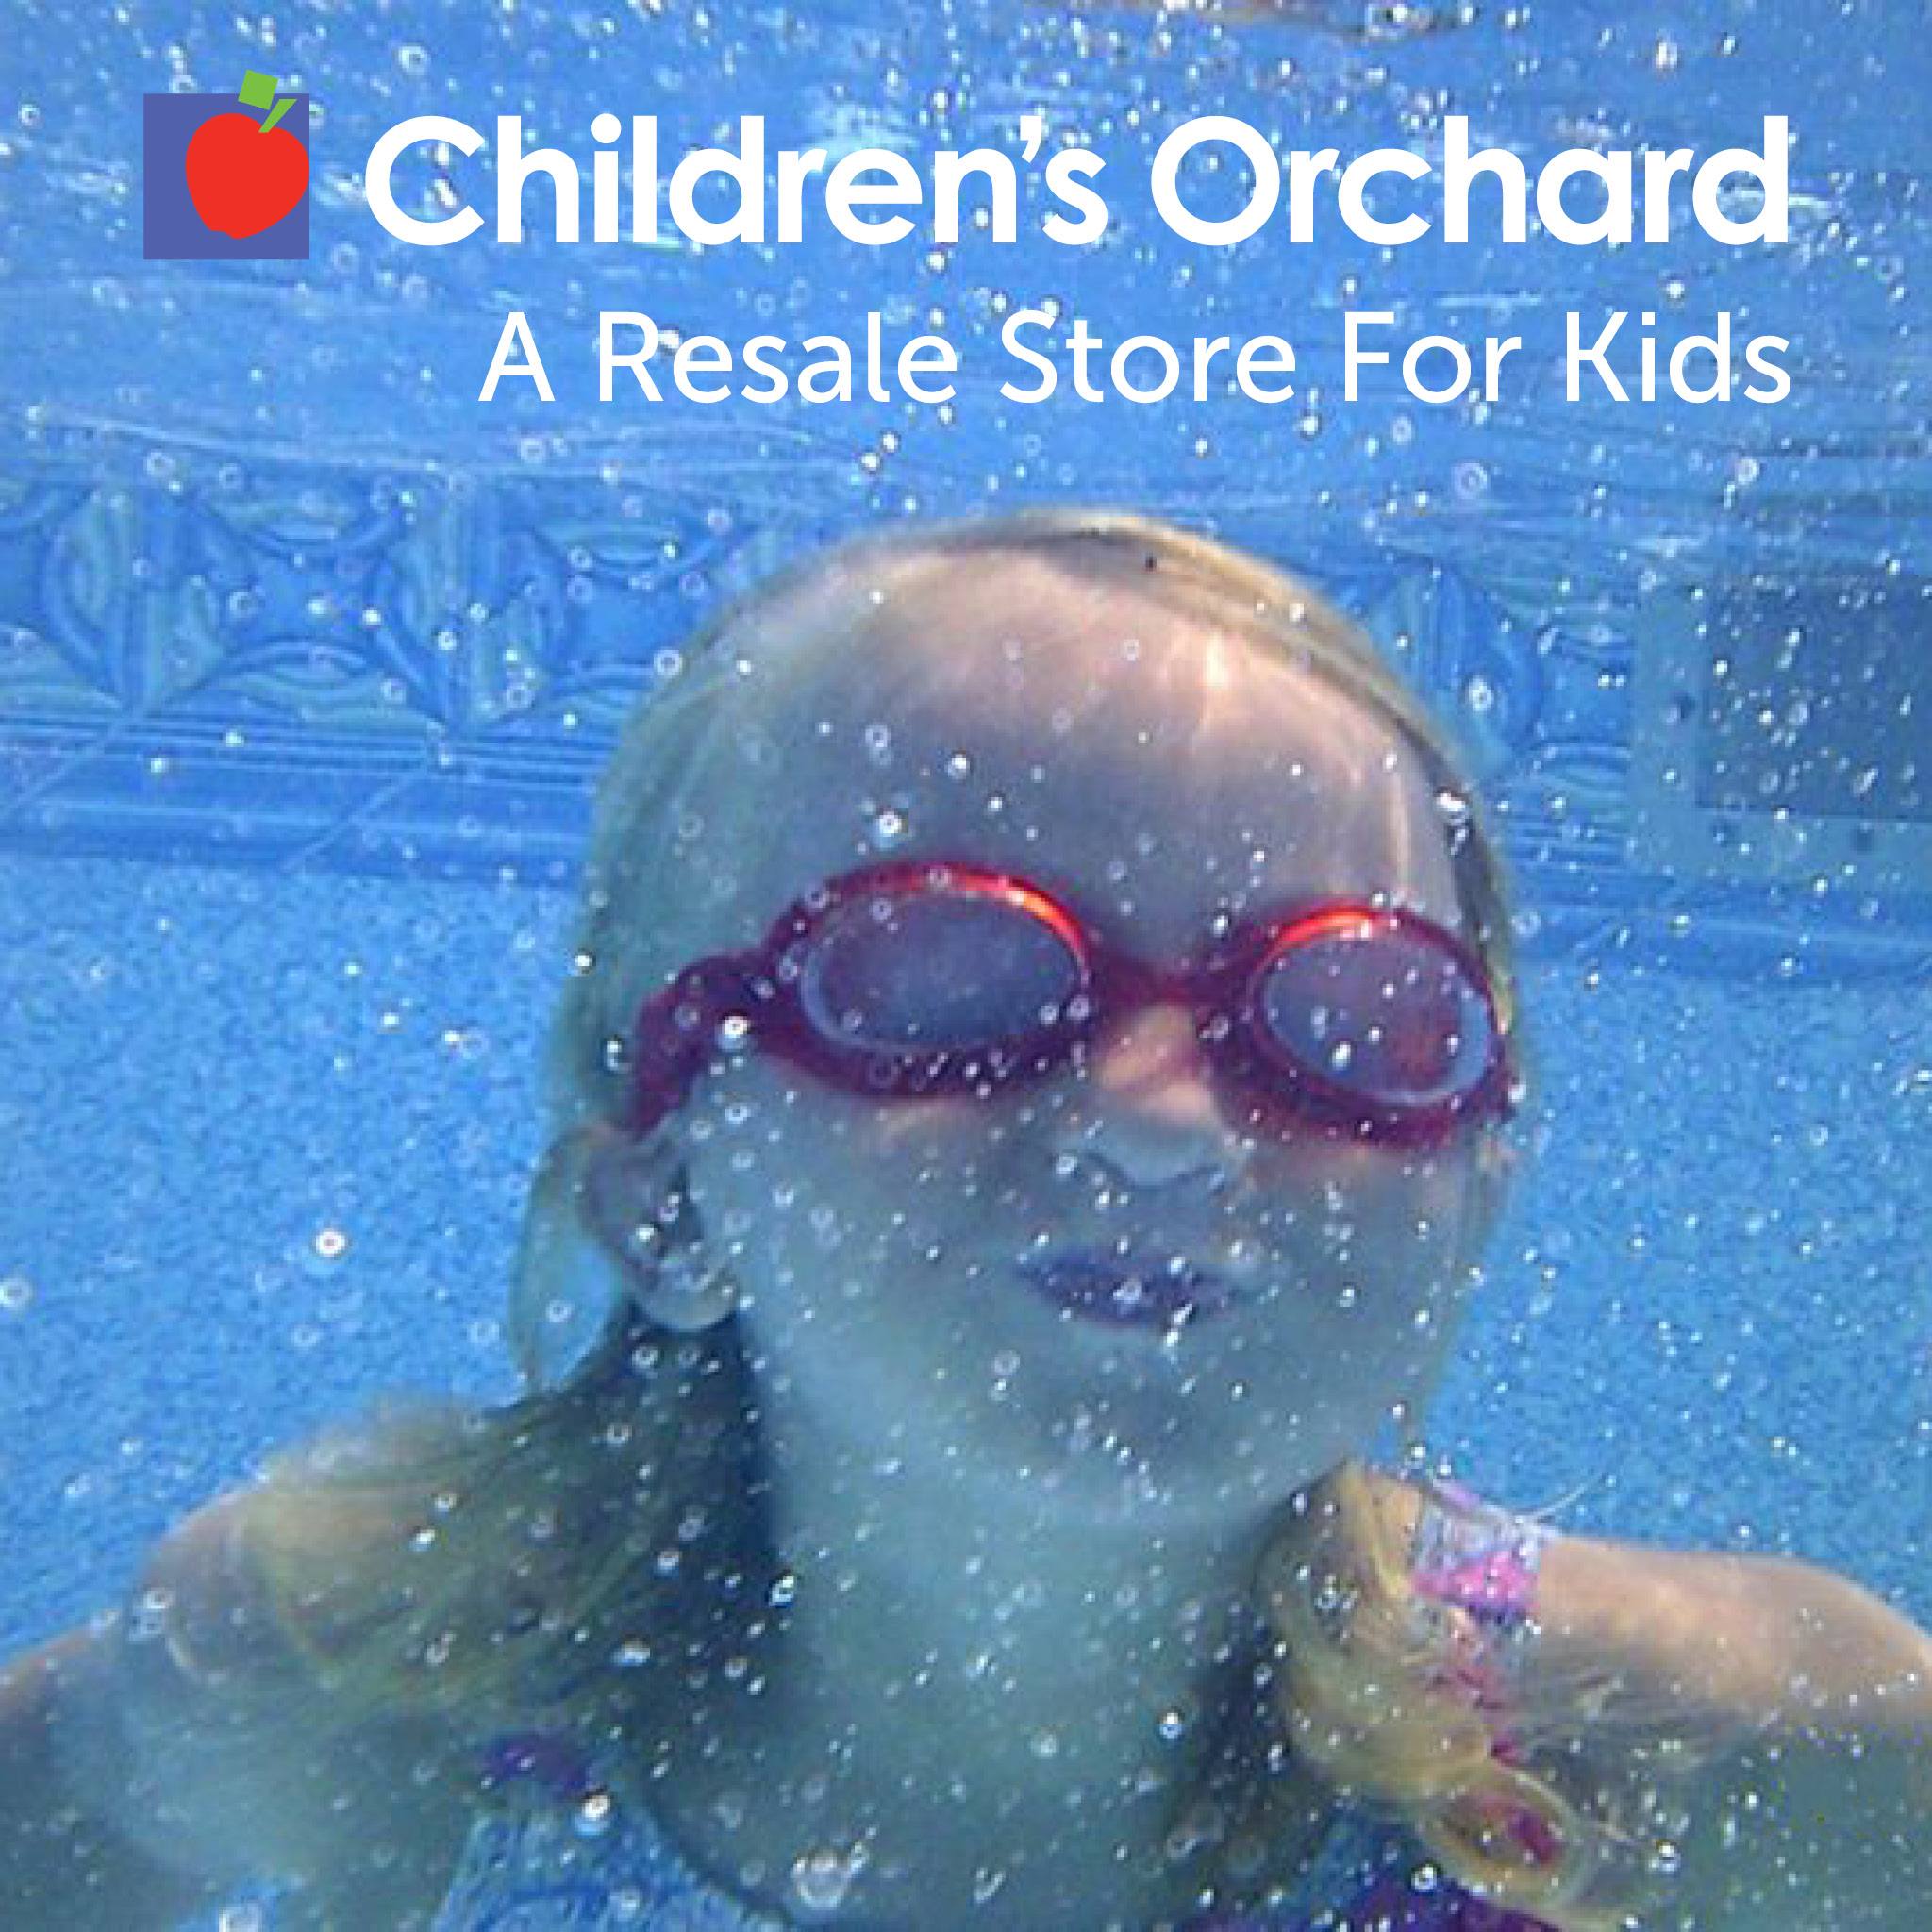 A resale store for kids. Little girl swimming underwater wearing goggles